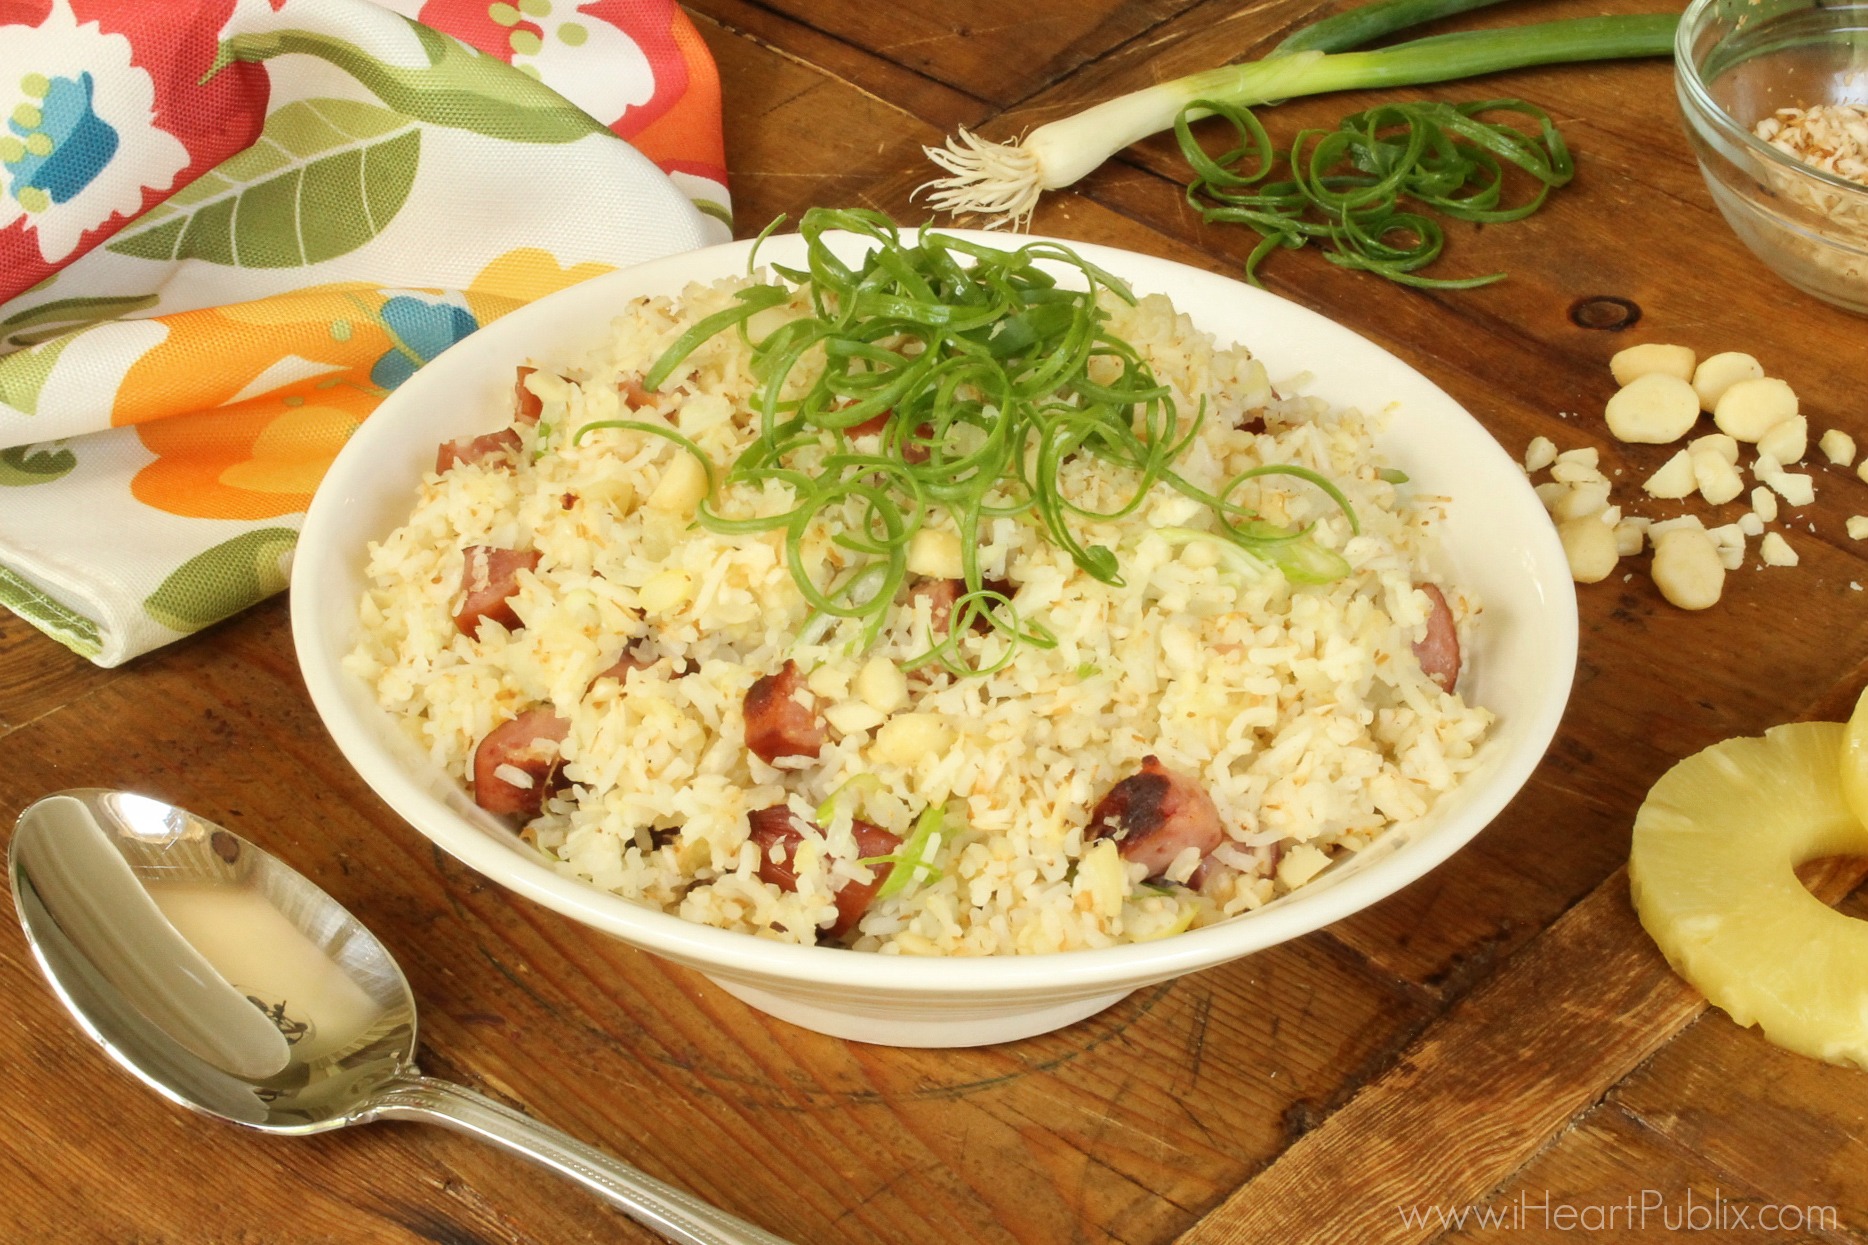 Hawaiian Luau Rice With Smoked Sausage - Fantastic Meal For The Eckrich Smoked Sausage Sale At Publix 1